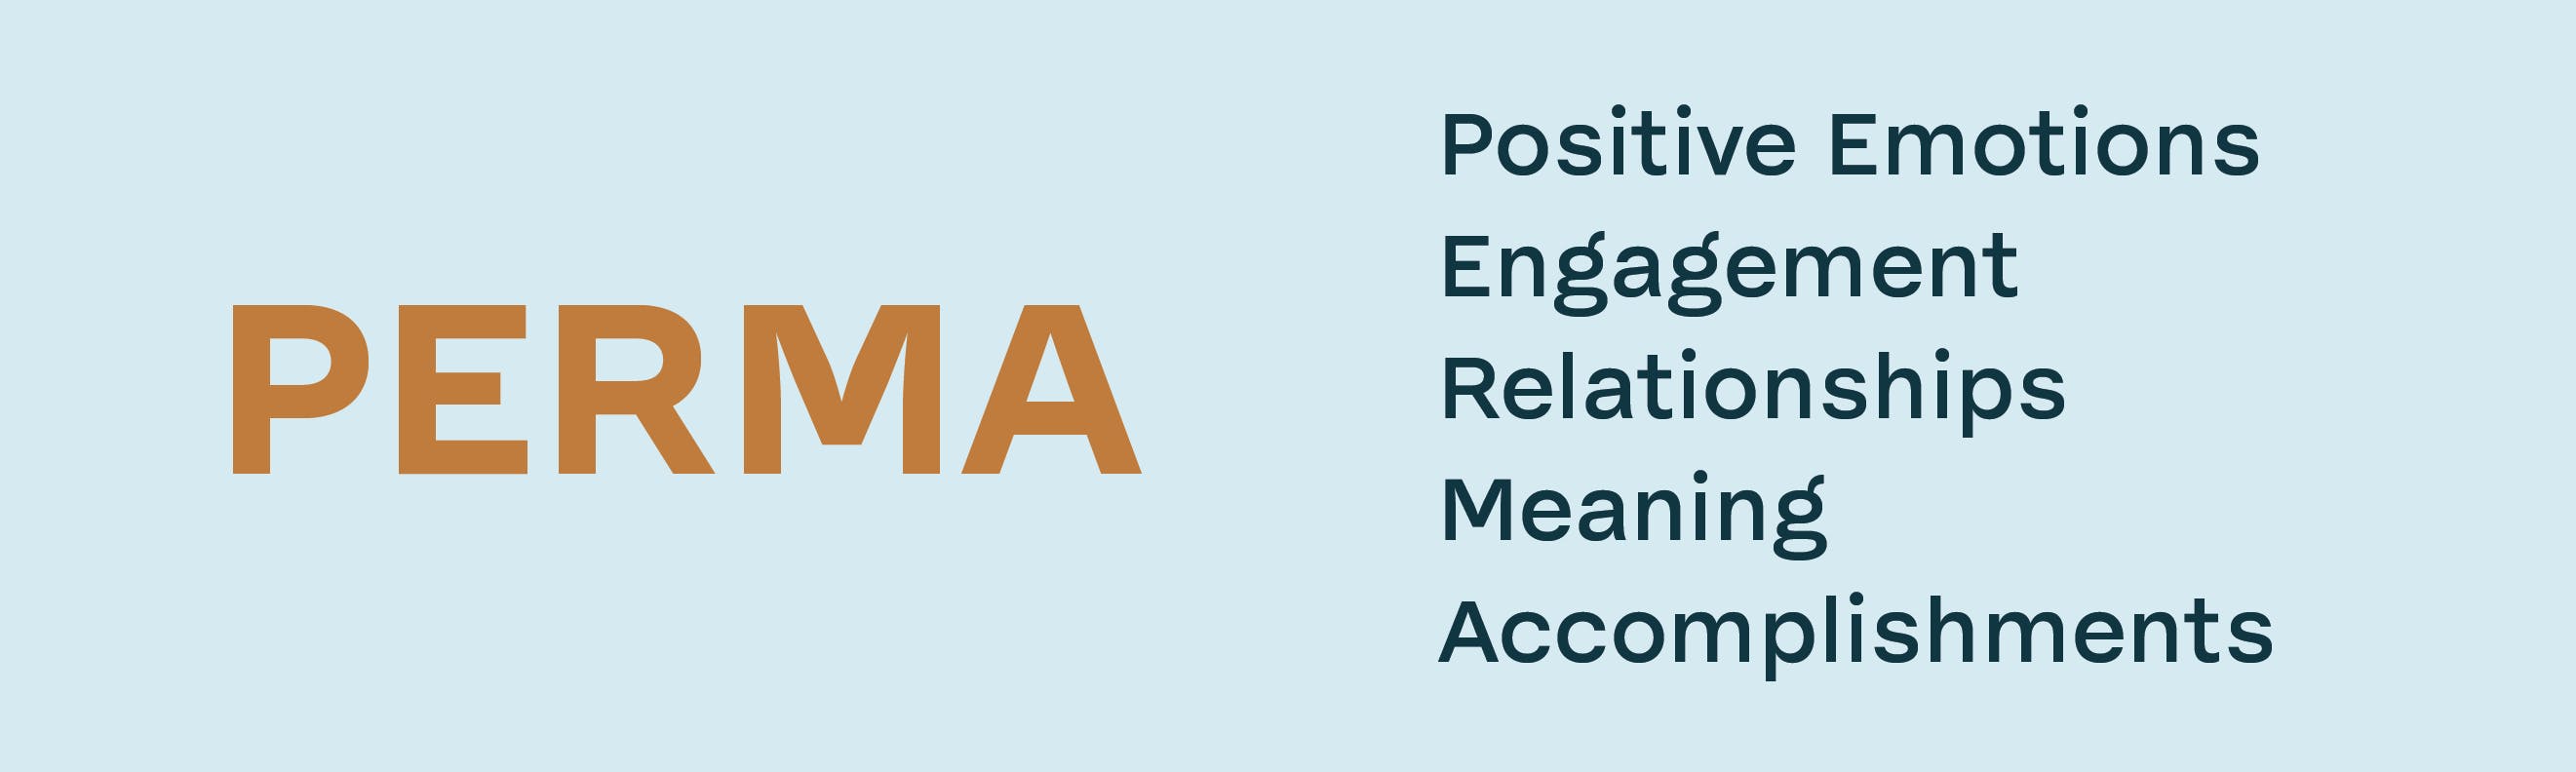 PERMA Model includes positive emotions, engagement, relationships, meaning, and accomplishments.